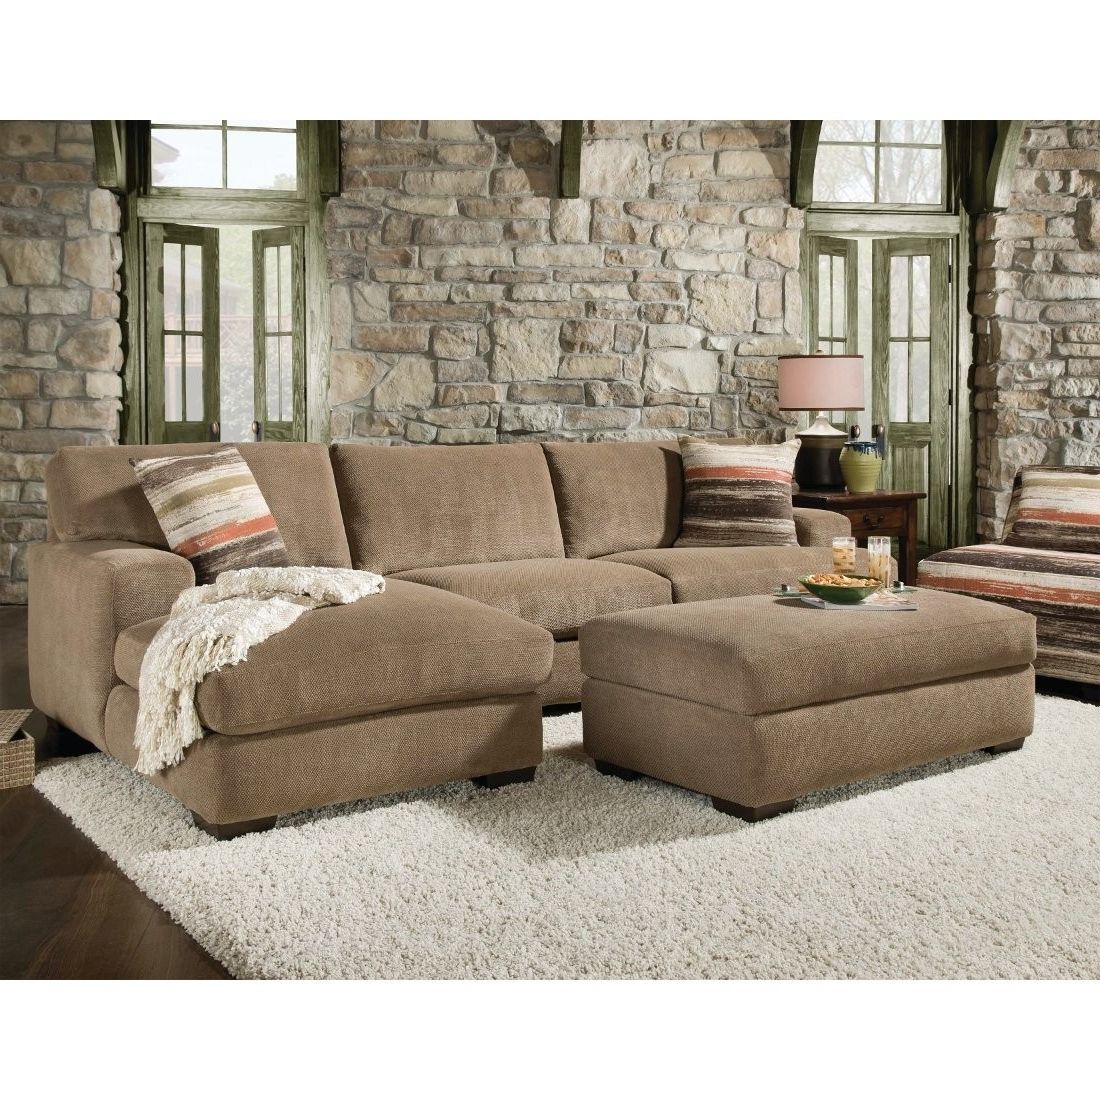 Well Liked Beautiful Sectional Sofa With Chaise And Ottoman Pictures Regarding Sectional Chaises (View 10 of 15)